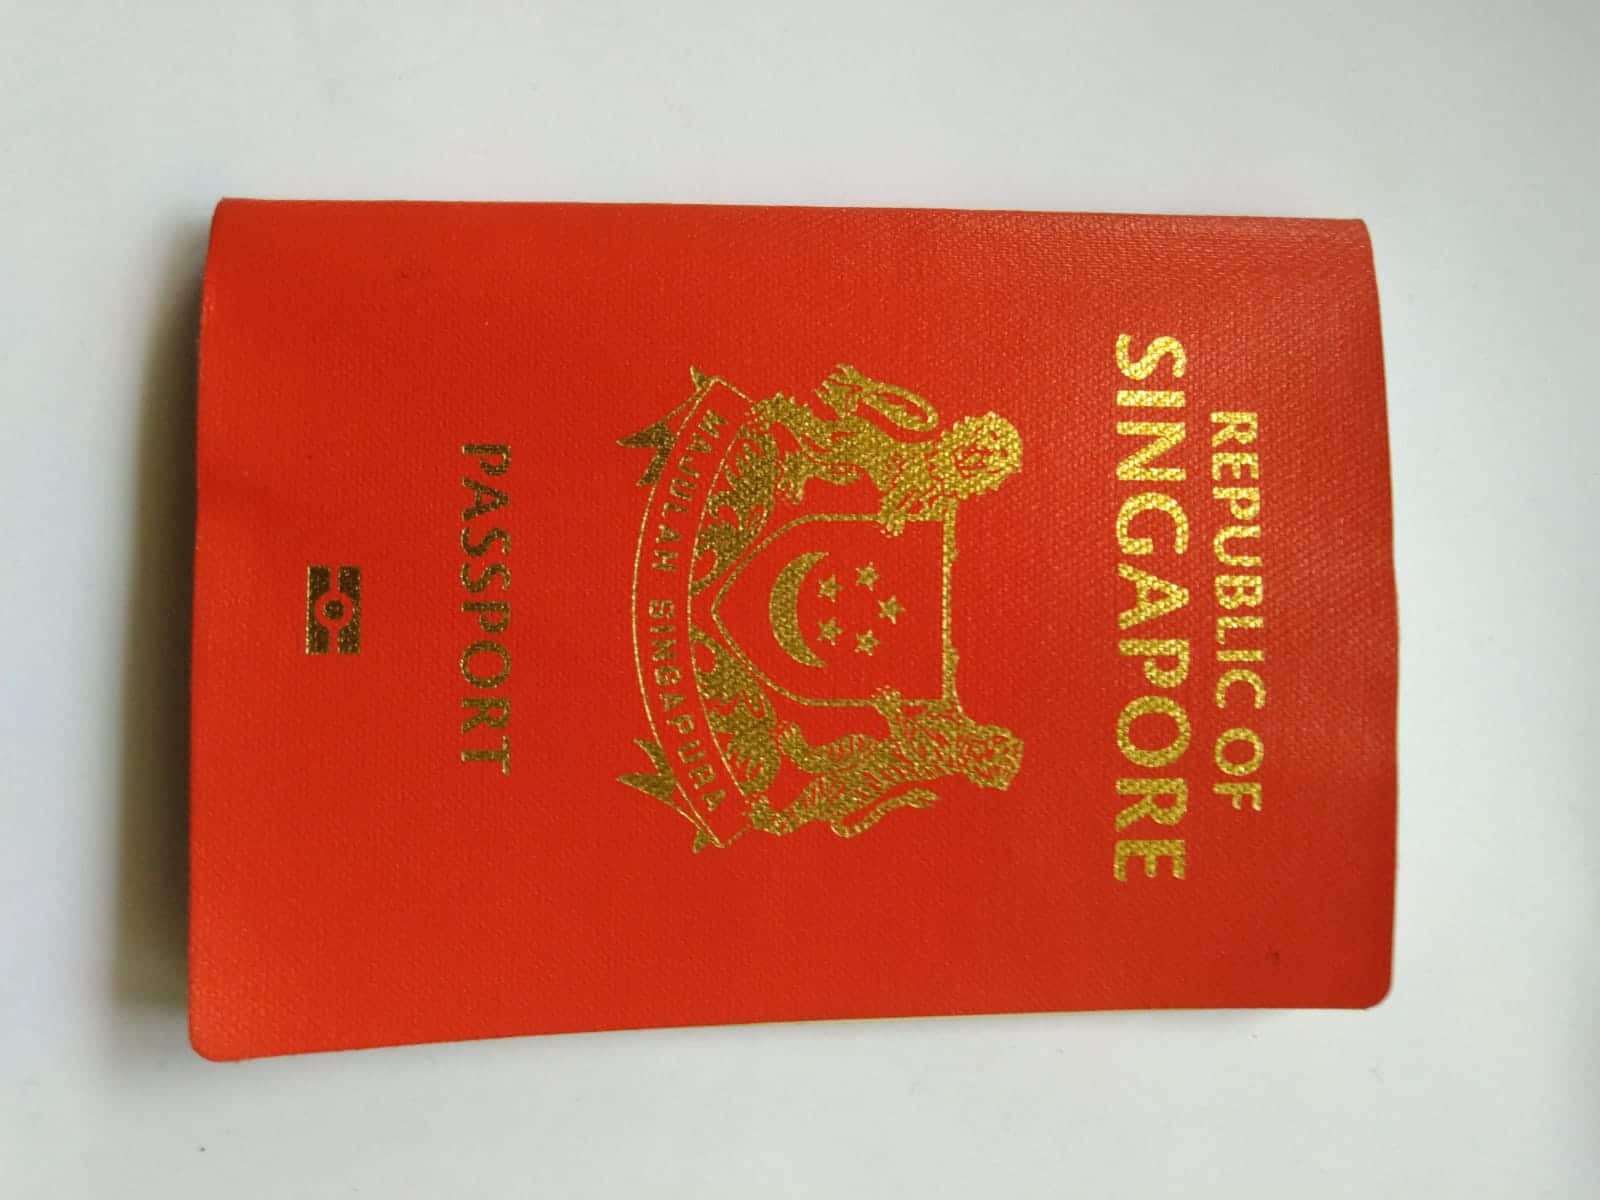 Facts about Singapore - it has one of the most powerful passports